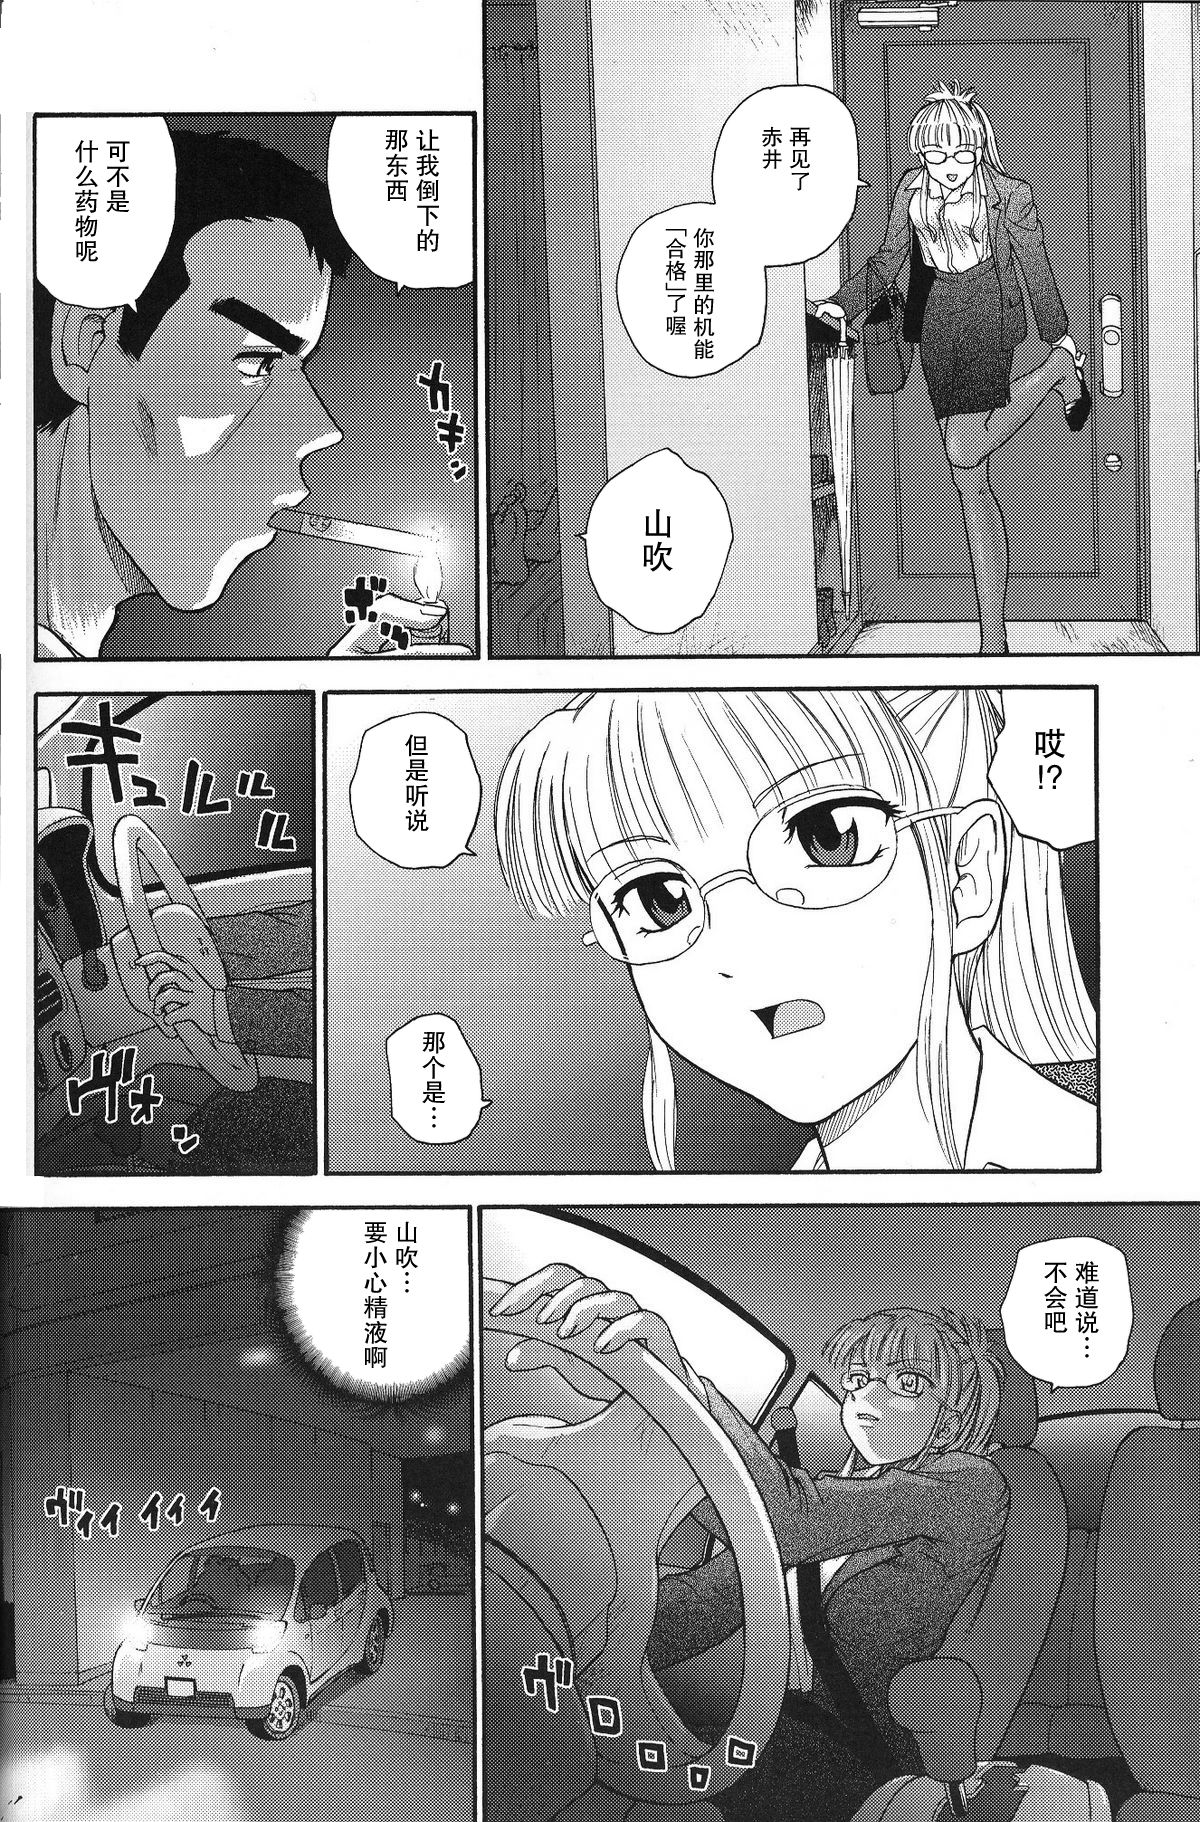 (C71) [Behind Moon (Q)] Dulce Report 8 | 达西报告 8 [Chinese] [哈尼喵汉化组] [Decensored] page 33 full